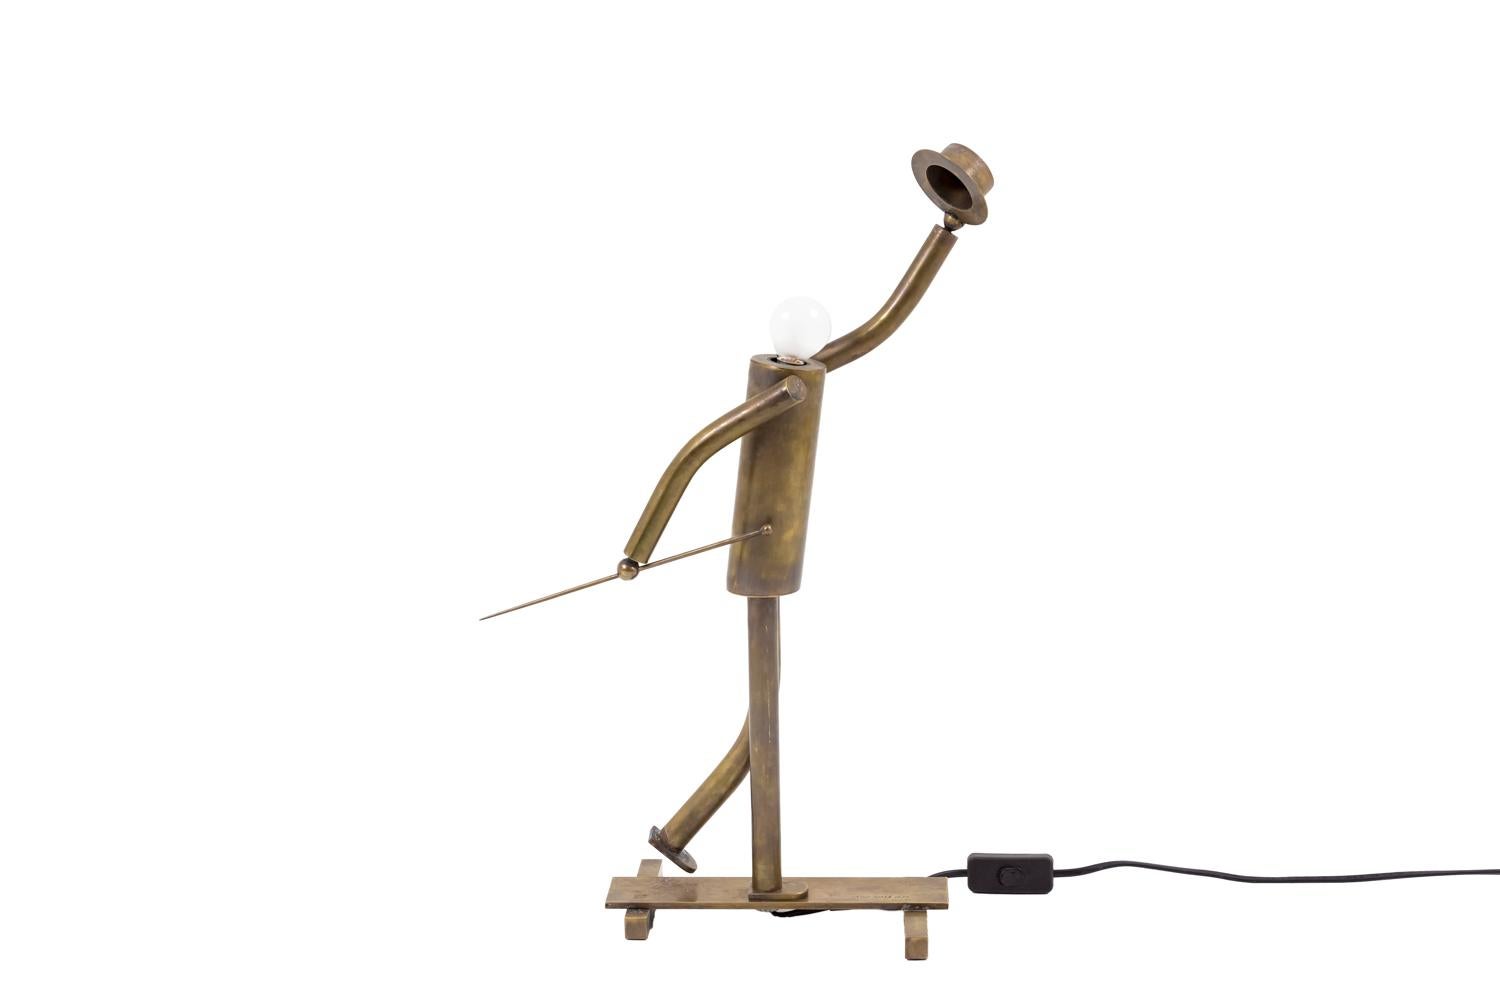 Lamp in patinated brass figuring a stylized music-hall dancer holding a hat in his raising hand and a stick with a round knob in the other hand. The bulb represents the character head. He raises his back leg and the other one is standing on a